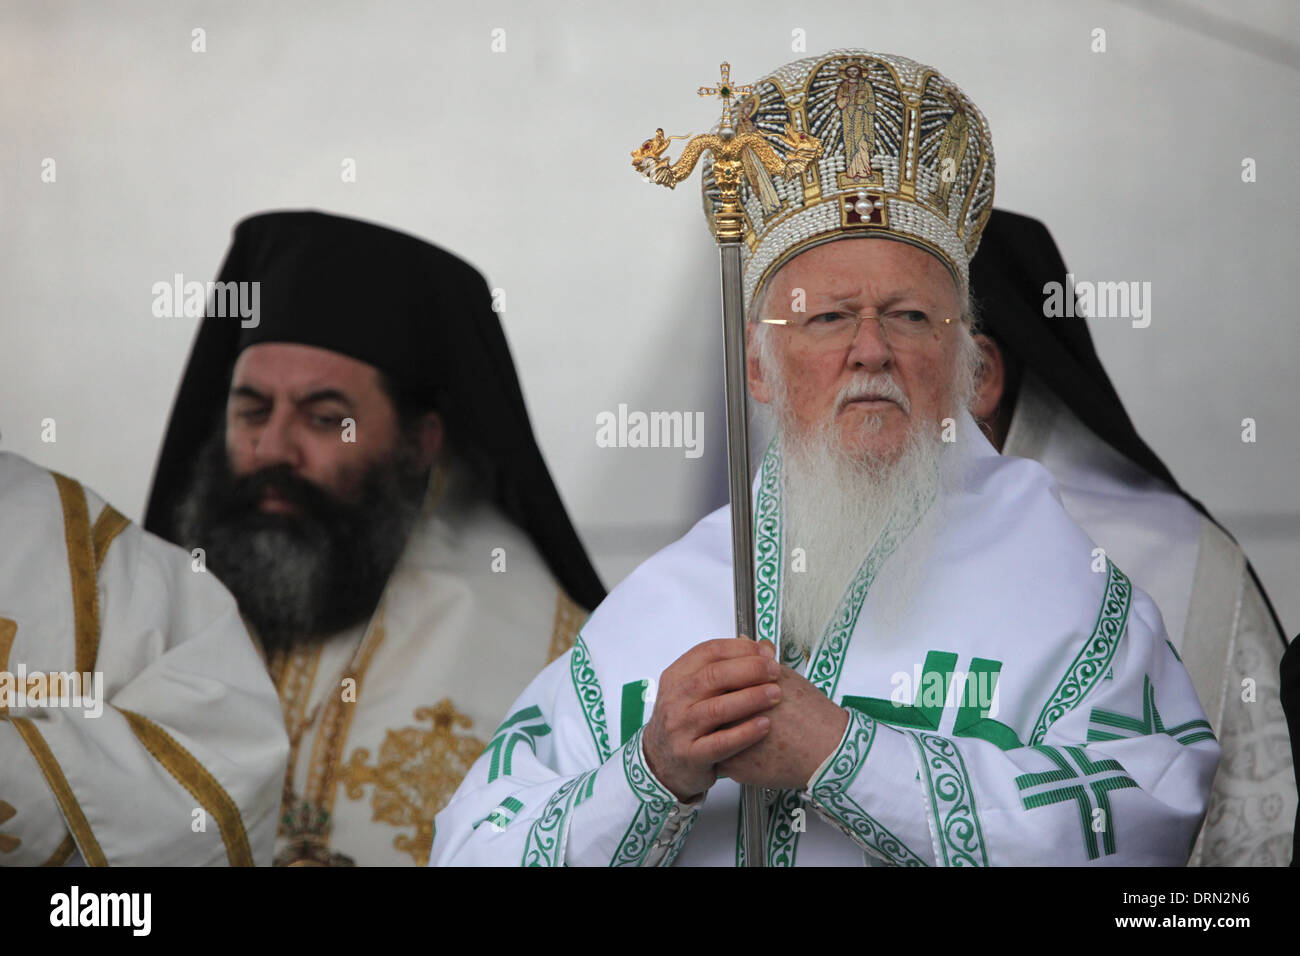 Patriarch Bartholomew I of Constantinople attends an orthodox service in honour of Saints Cyril and Methodius in Mikulcice. Stock Photo